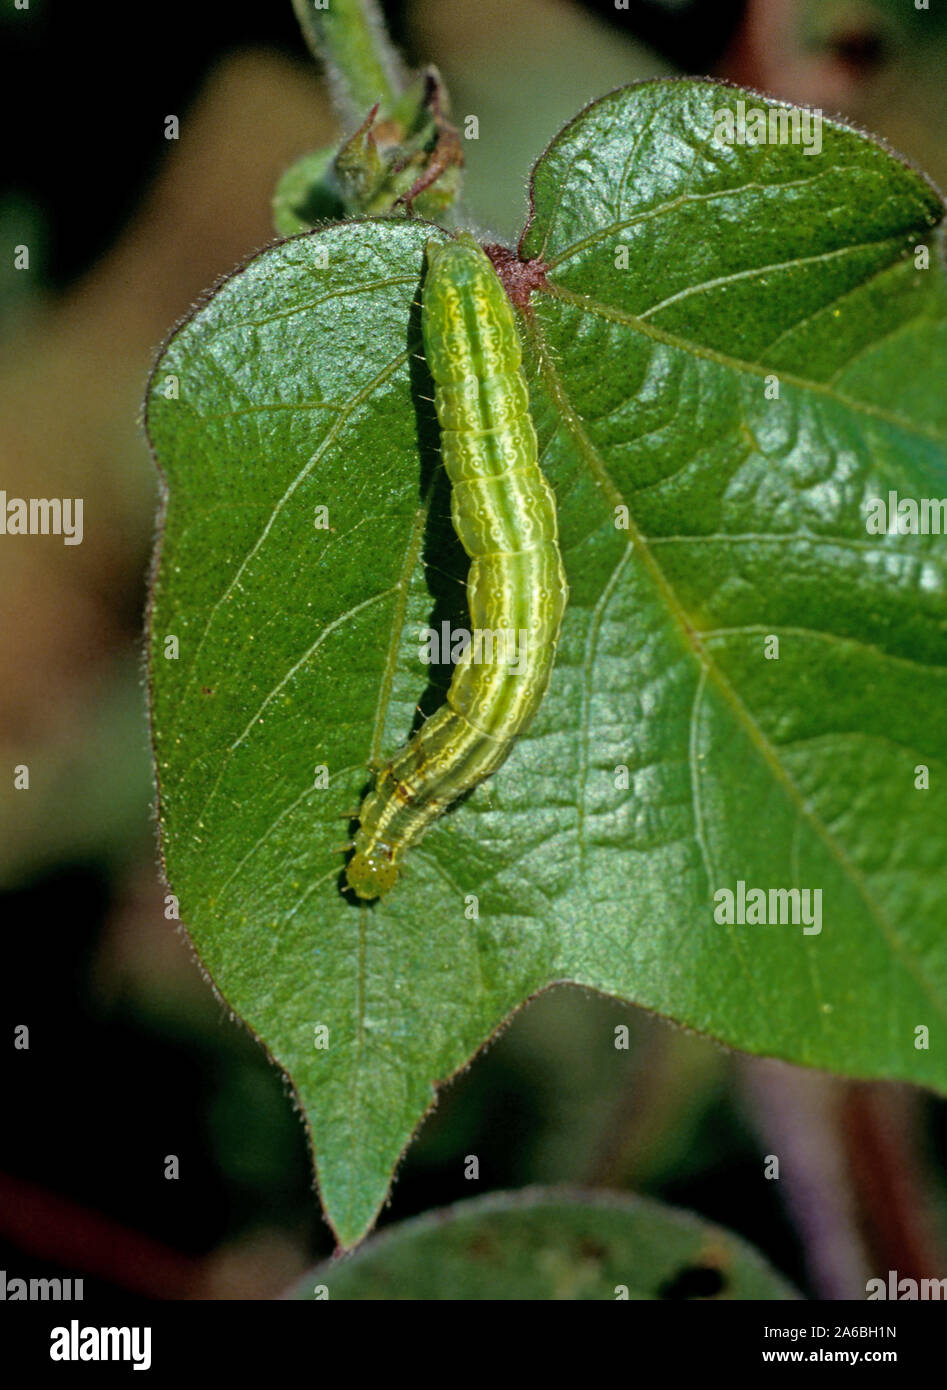 Cabbage looper (Trichoplusia ni) green, white striped caterpillar on damaged cotton leaf, Mississipi, USA, October Stock Photo